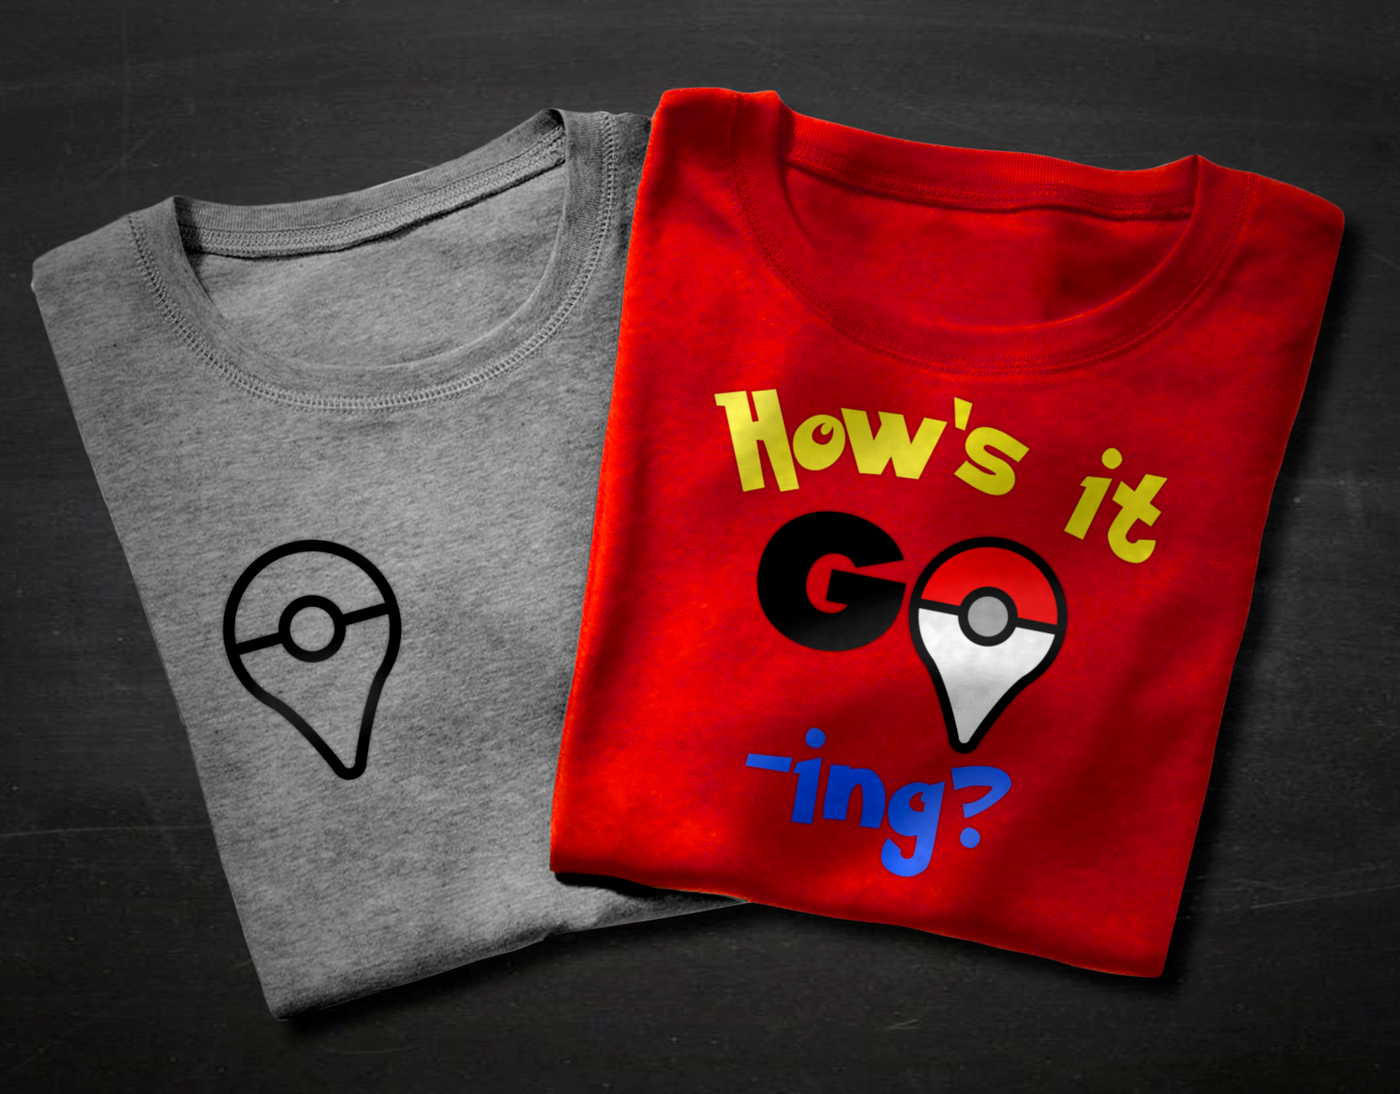 Two shirts. One says "How's it Go-ing?" with a red and white marker for the O. The other shirt only has the marker.